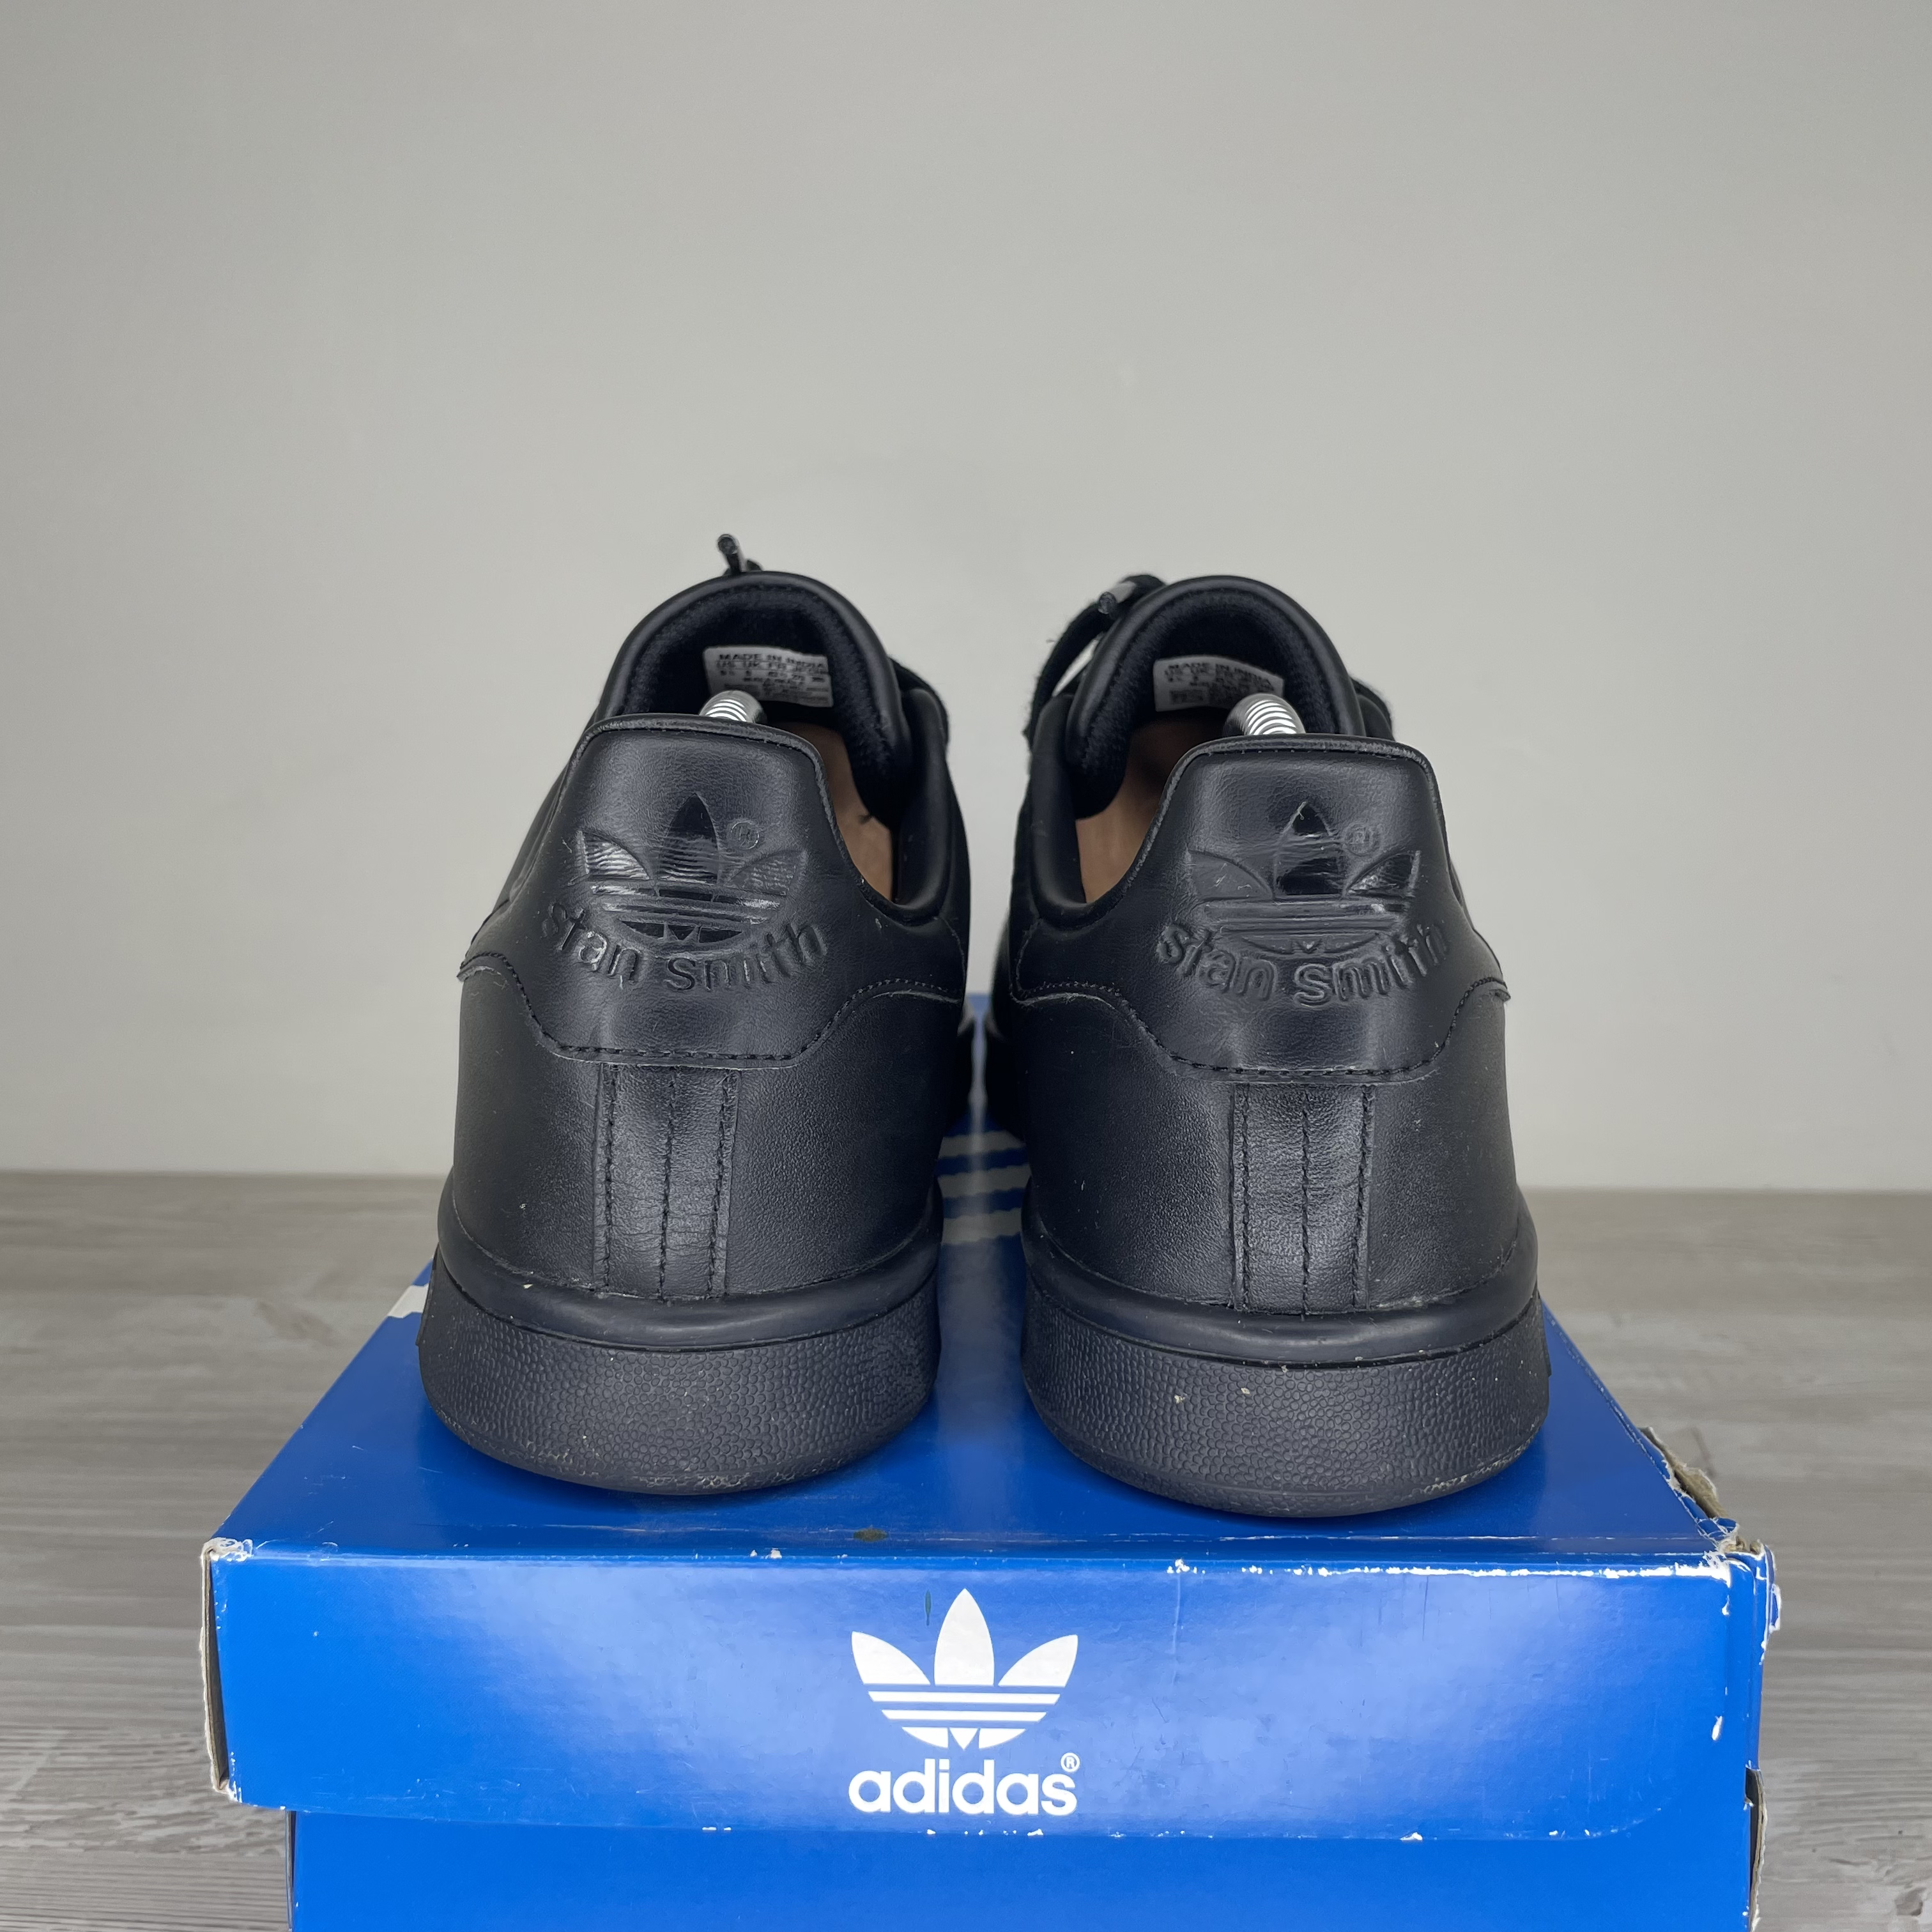 Adidas Sneakers, Stan Smith All Black (43 1/3)